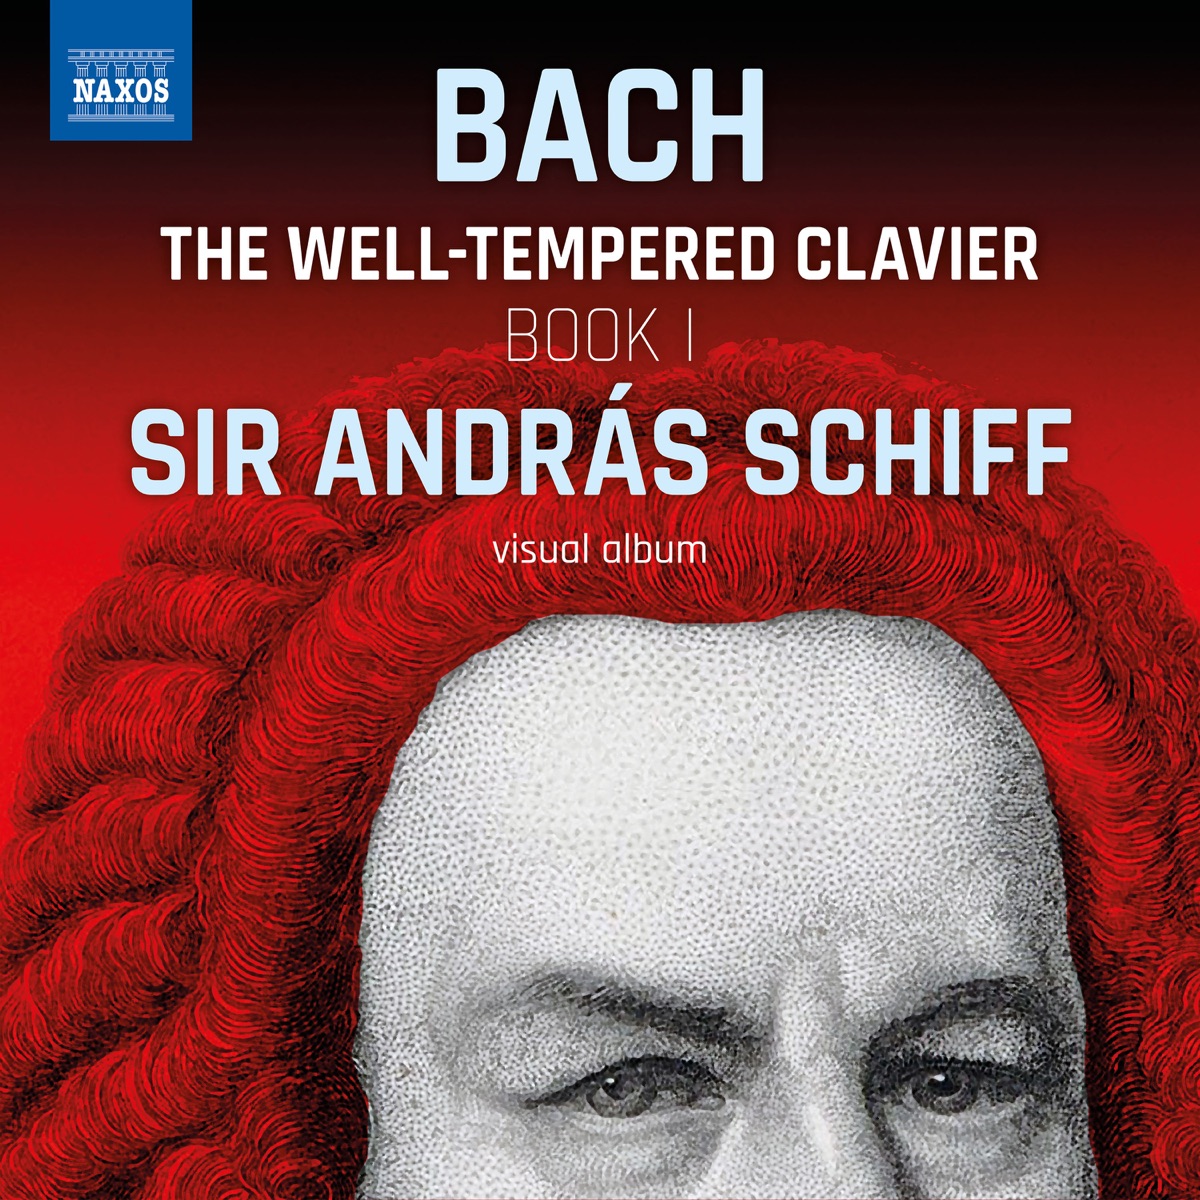 Sir András Schiff plays The Well-Tempered Clavier, Book I (Visual Album) -  Album by András Schiff - Apple Music